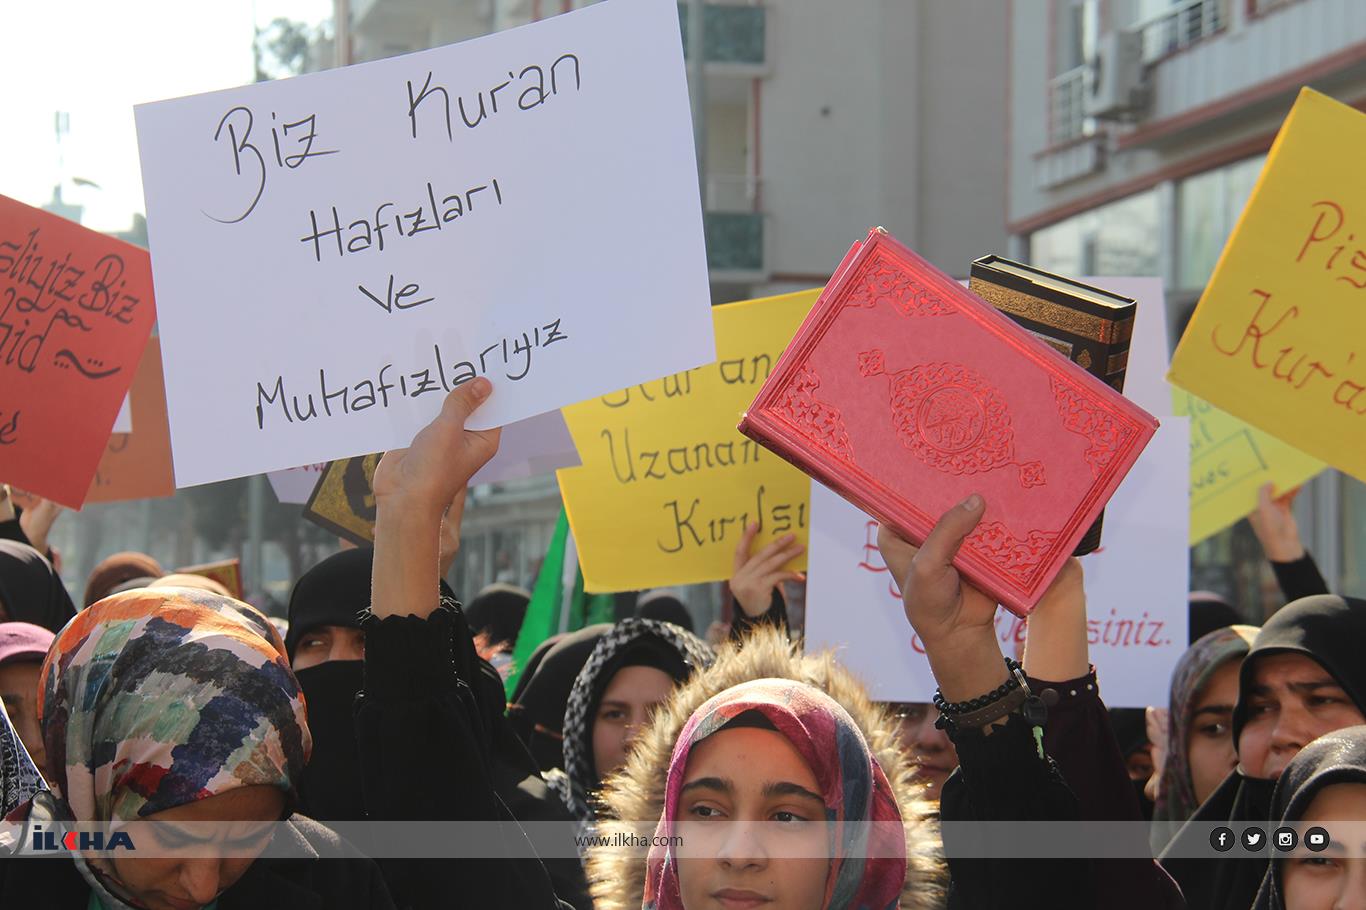 Demonstration to protest burning of Holy Quran in Sweden kicks off in Batman